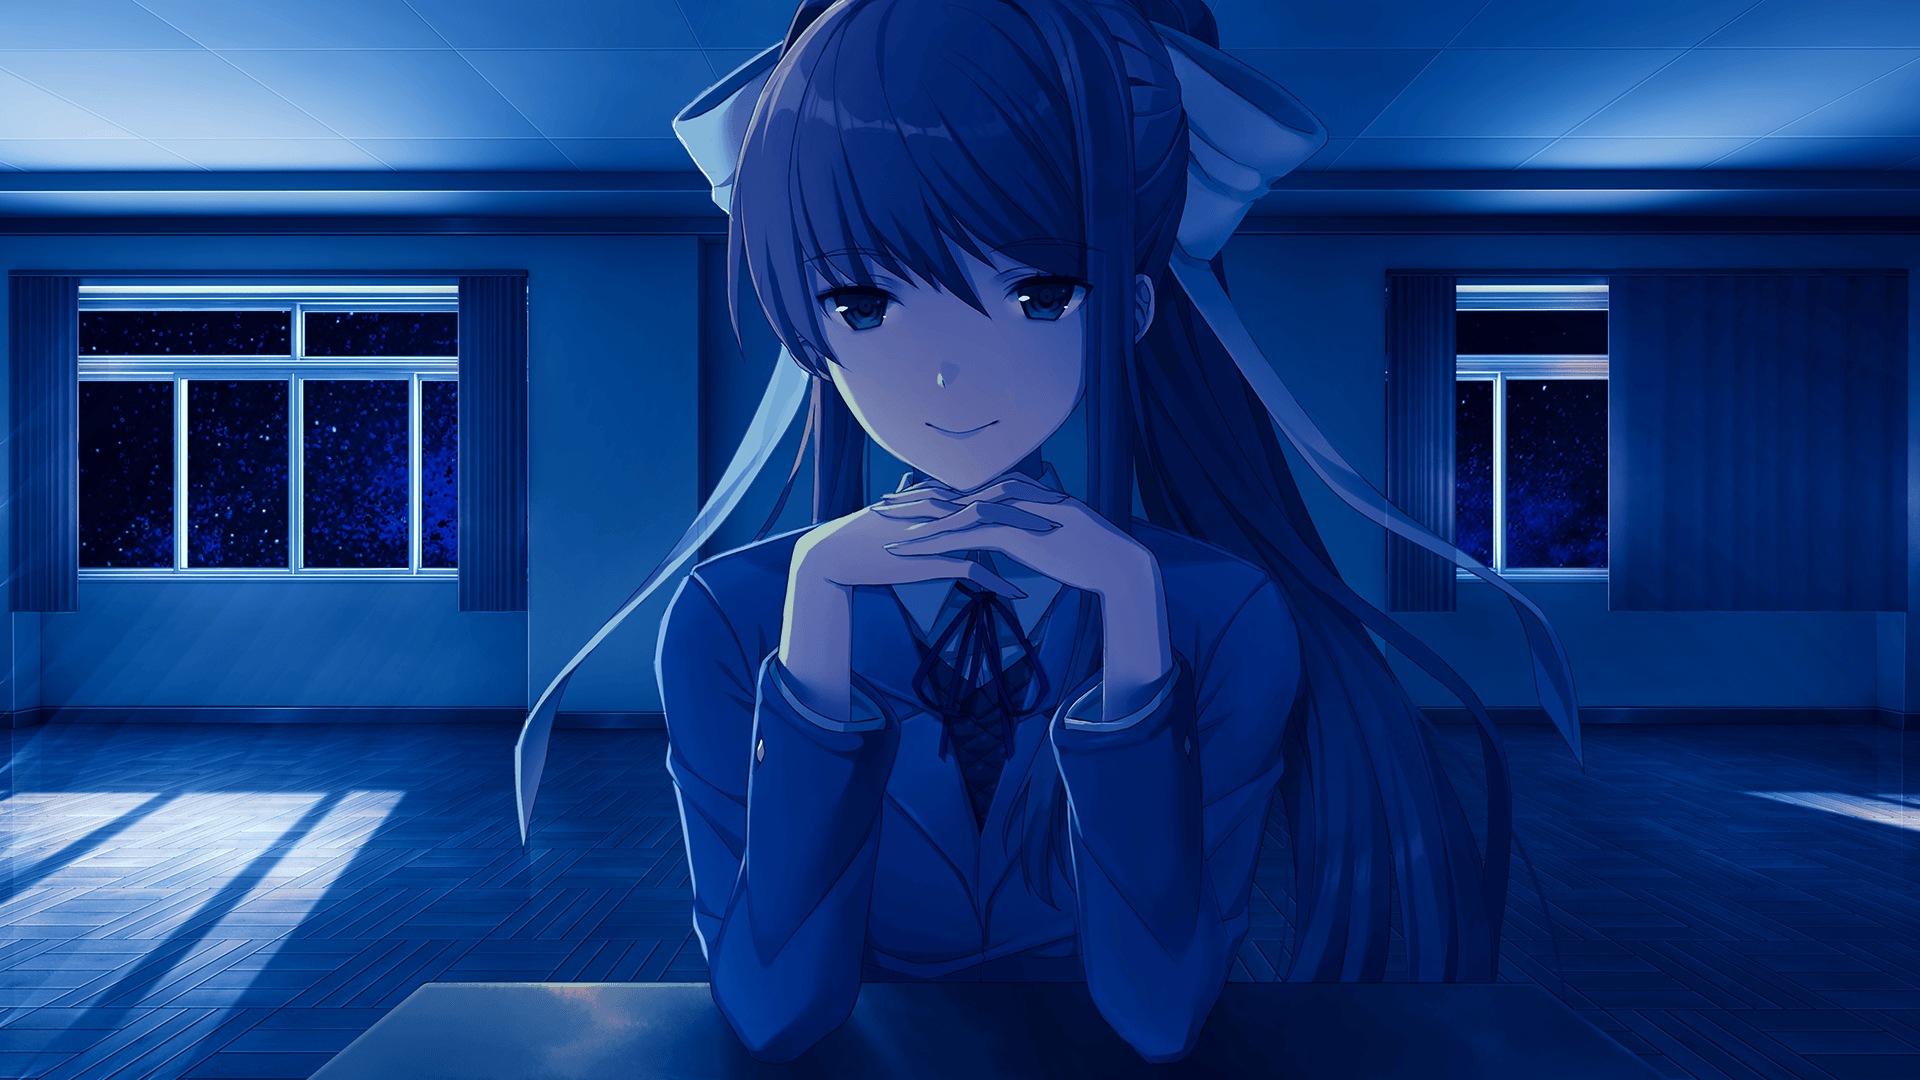 Tried to make a night version of the Just Monika Wallpapers.